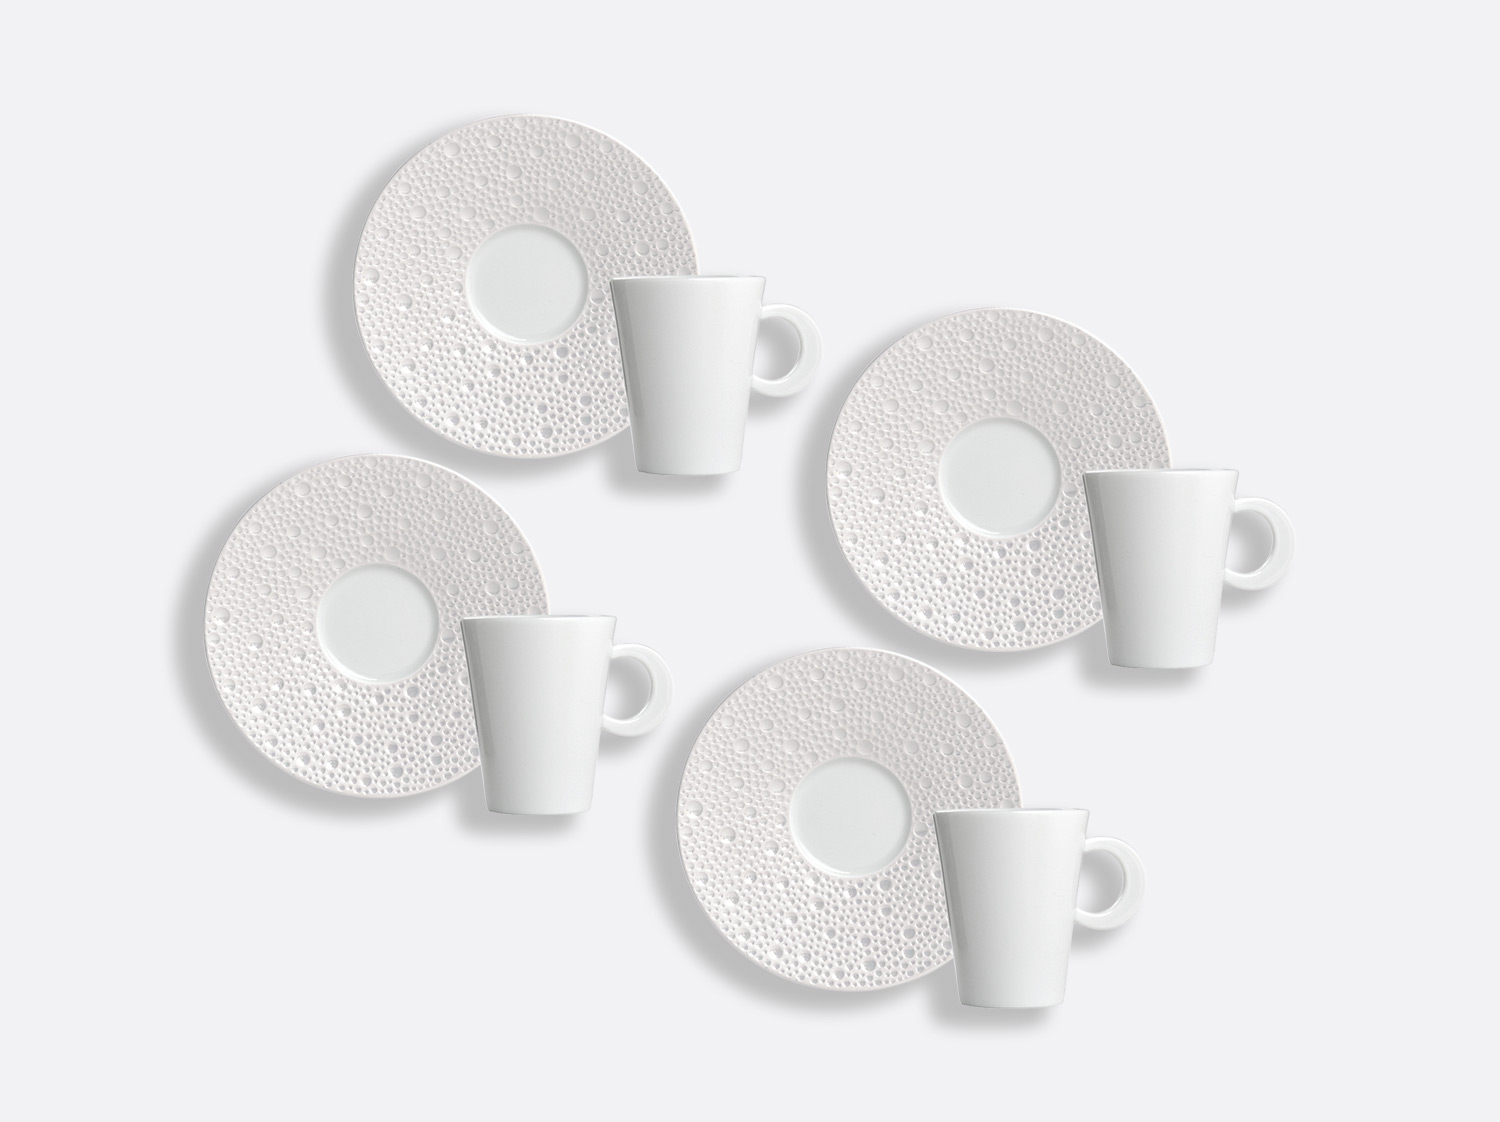 China Set of espresso cups and saucers 2 oz - Set of 4 of the collection Écume Perle | Bernardaud